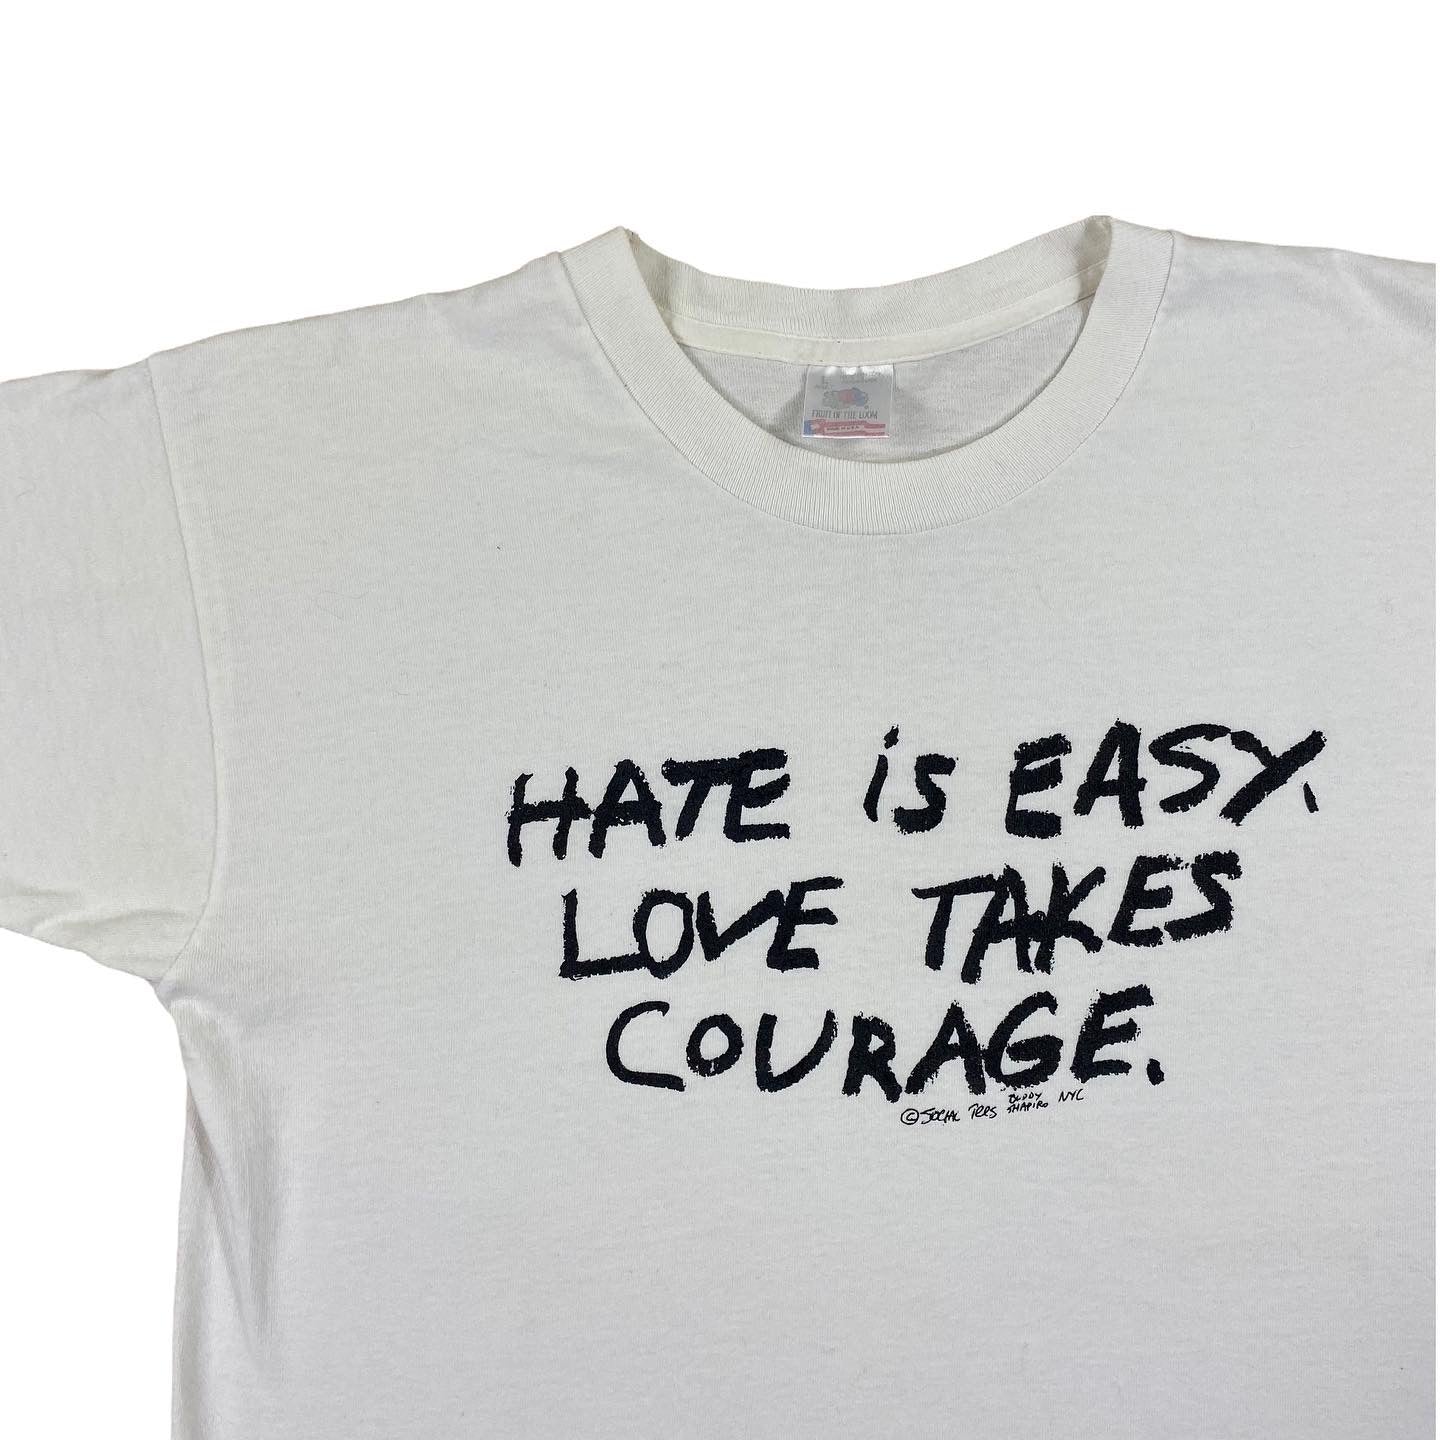 Love takes courage tee M/L